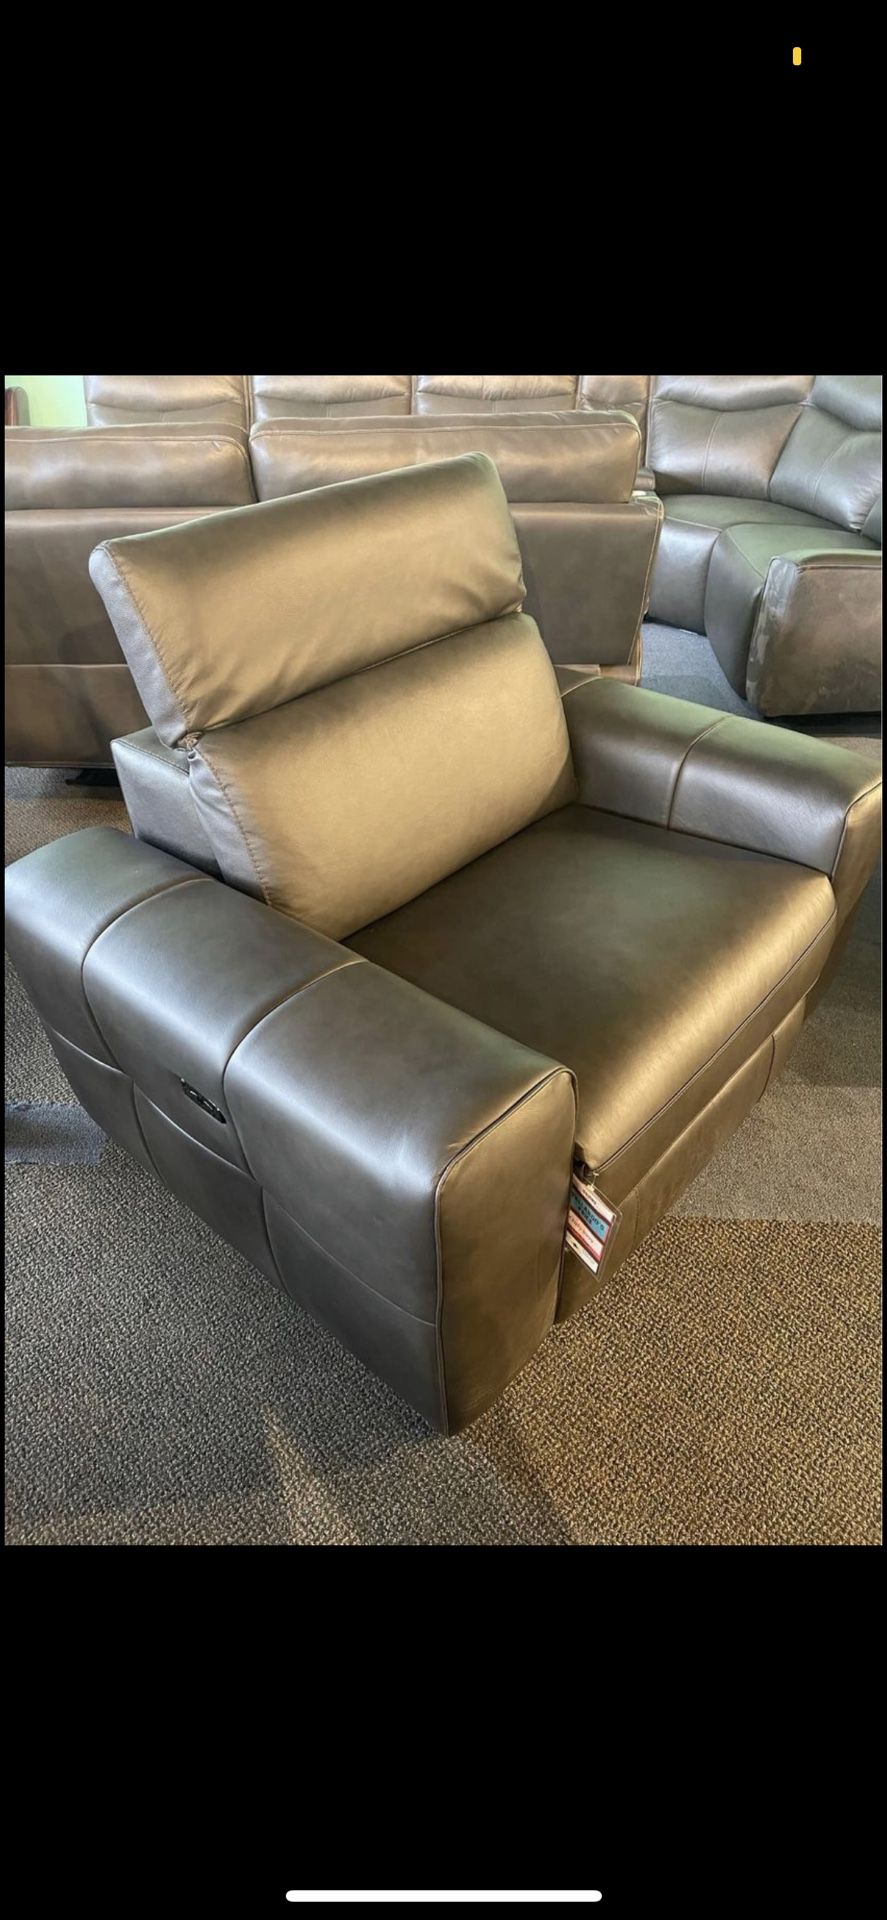 Beautiful Large Italian Leather Reclining sofa set (see description for full cost)